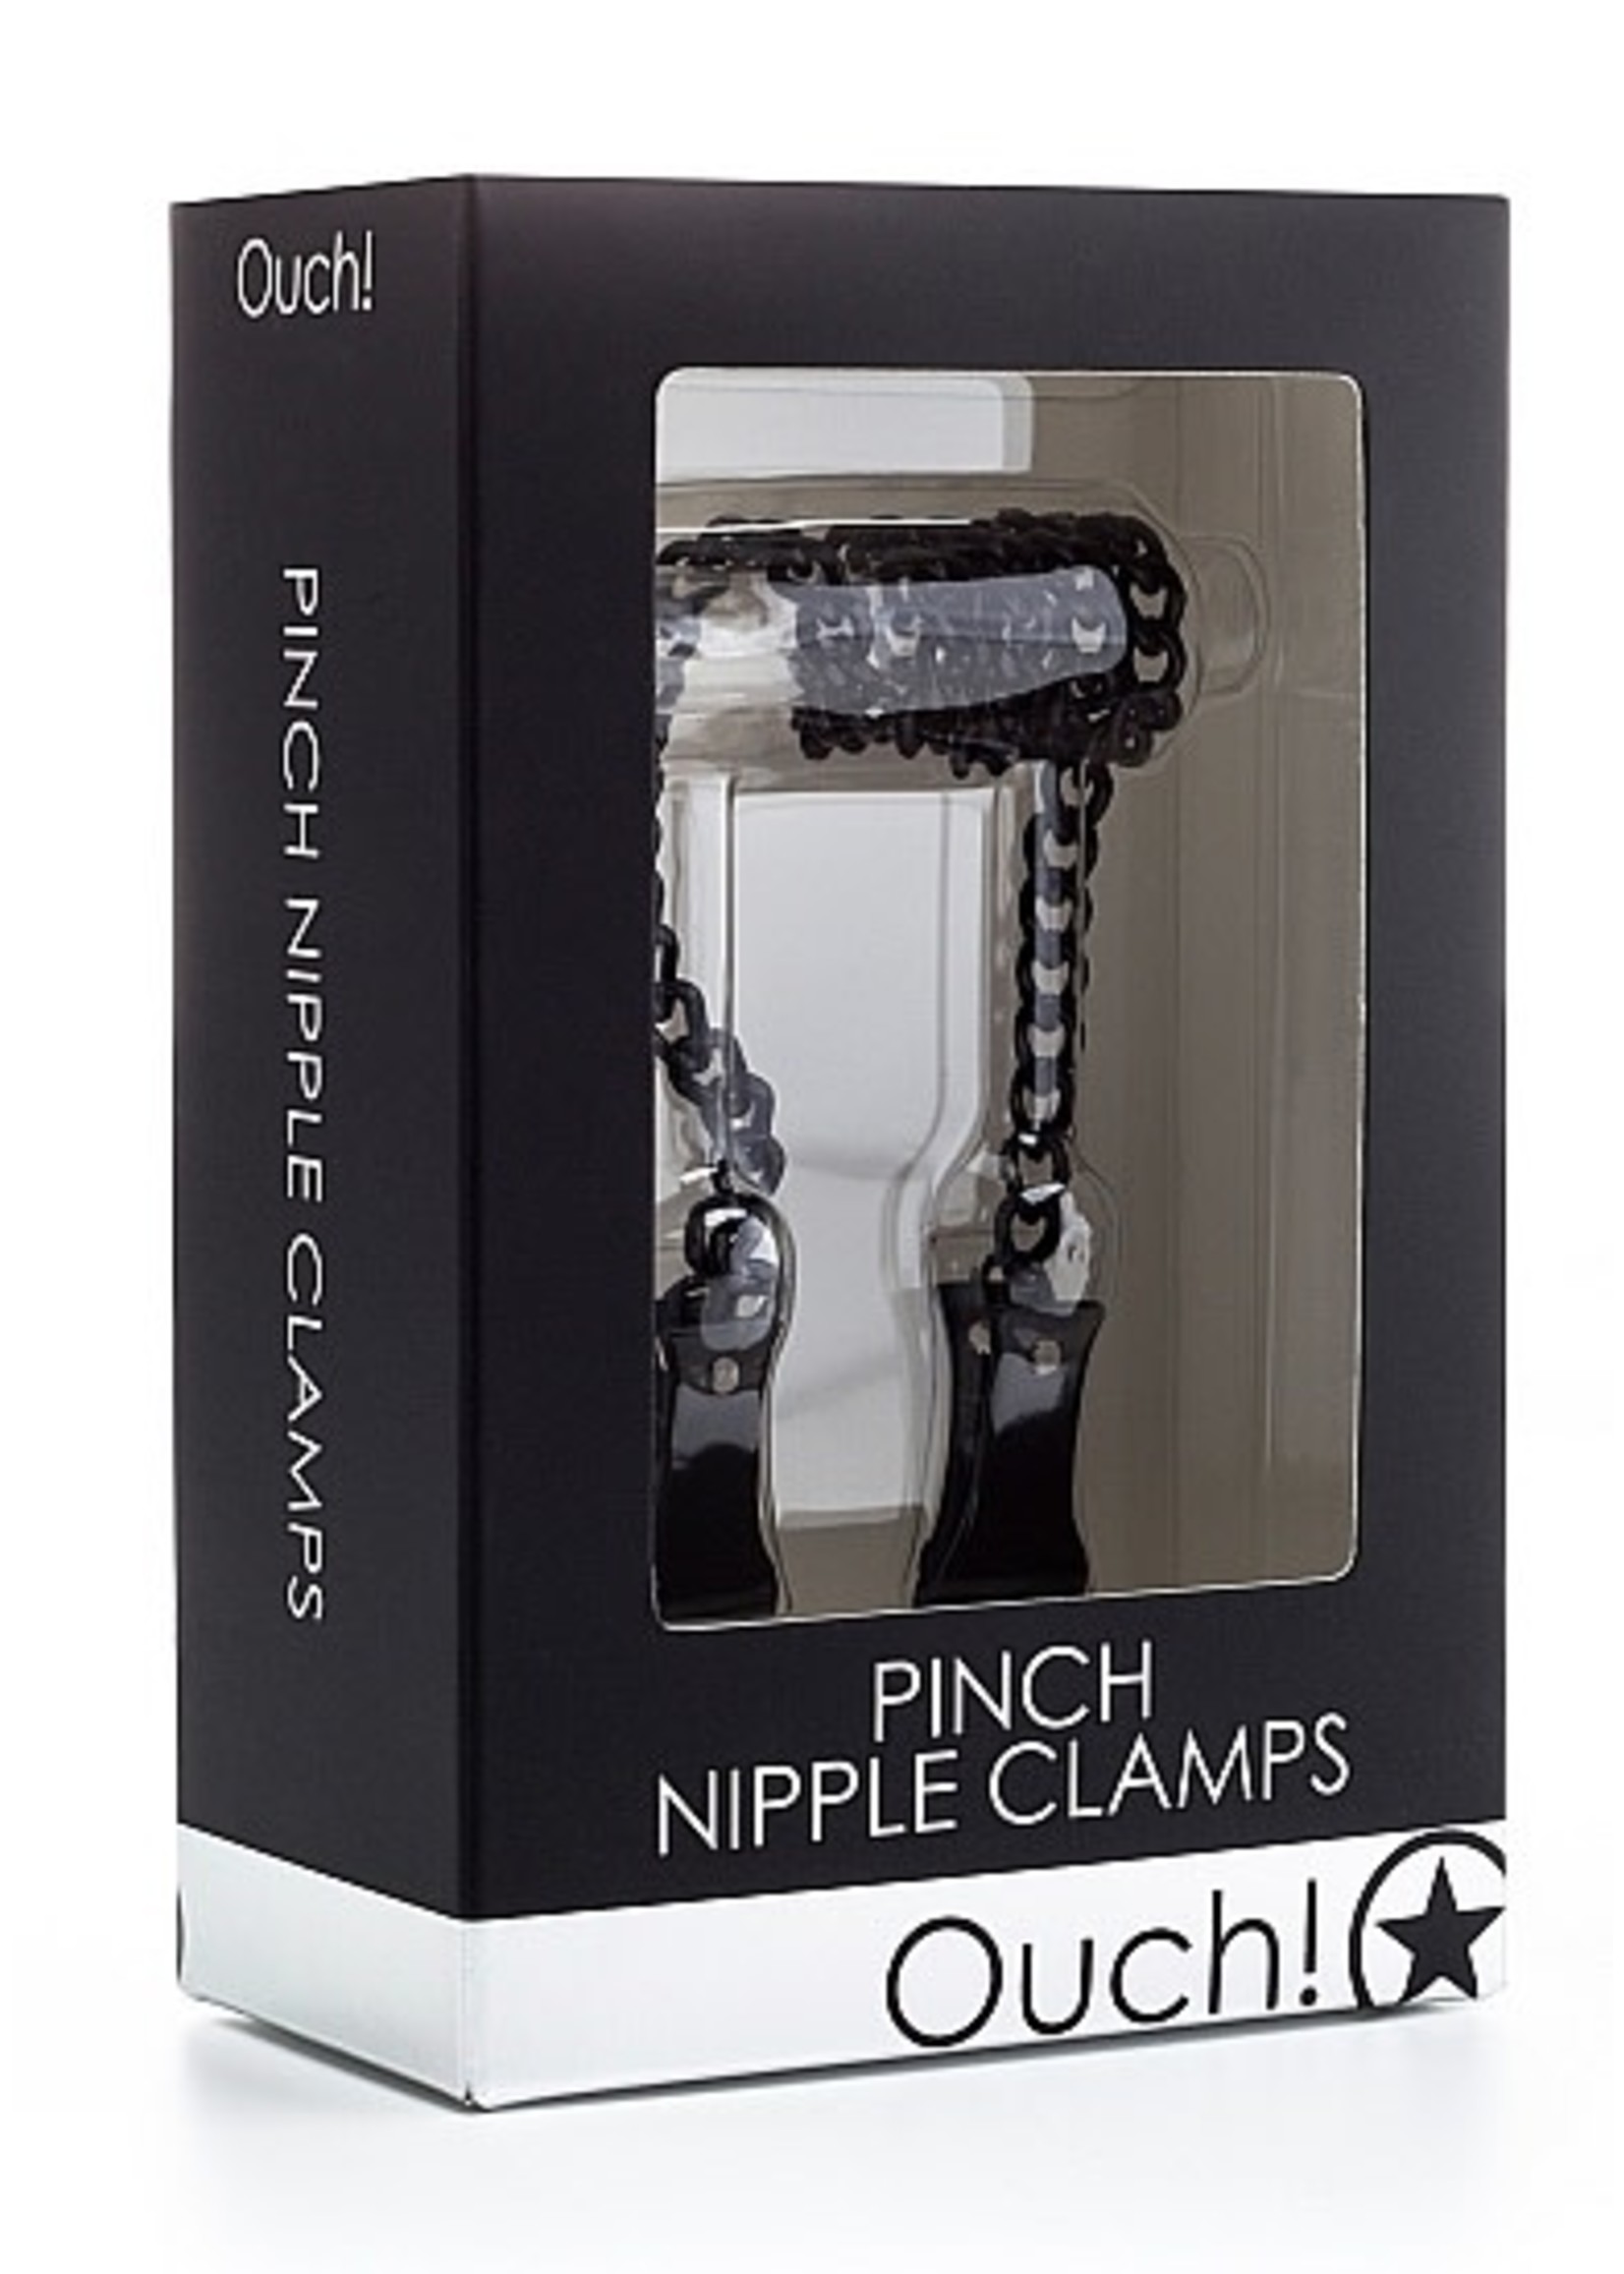 Ouch! Pinch nipple clamps black